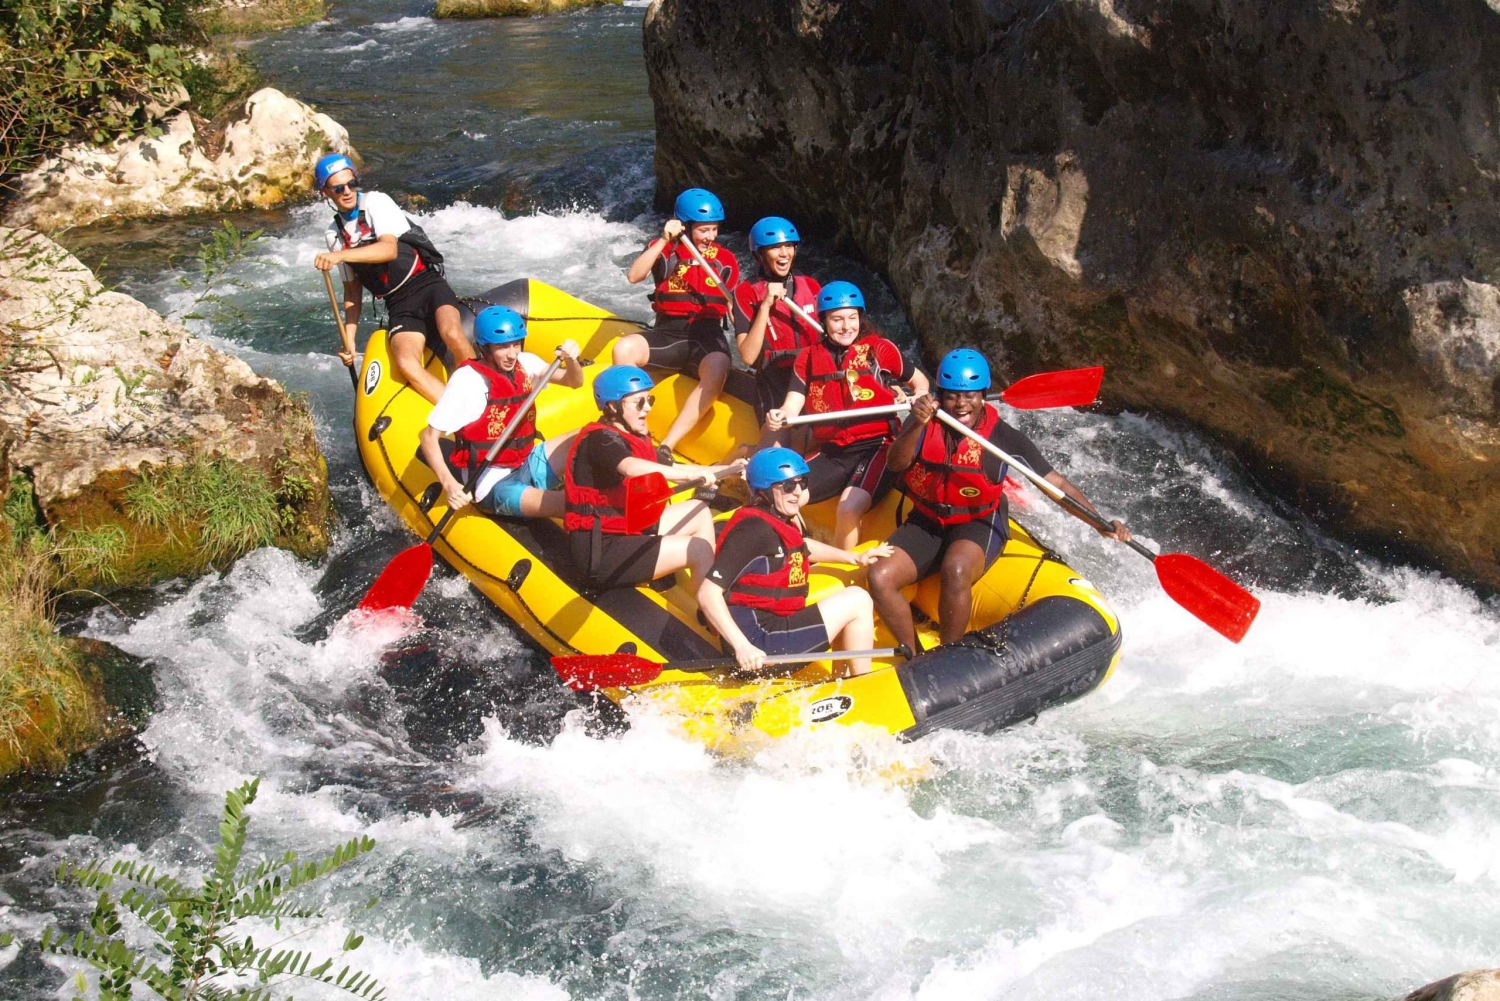 Split: Cetina River Rafting with Cliff Jumping Tour